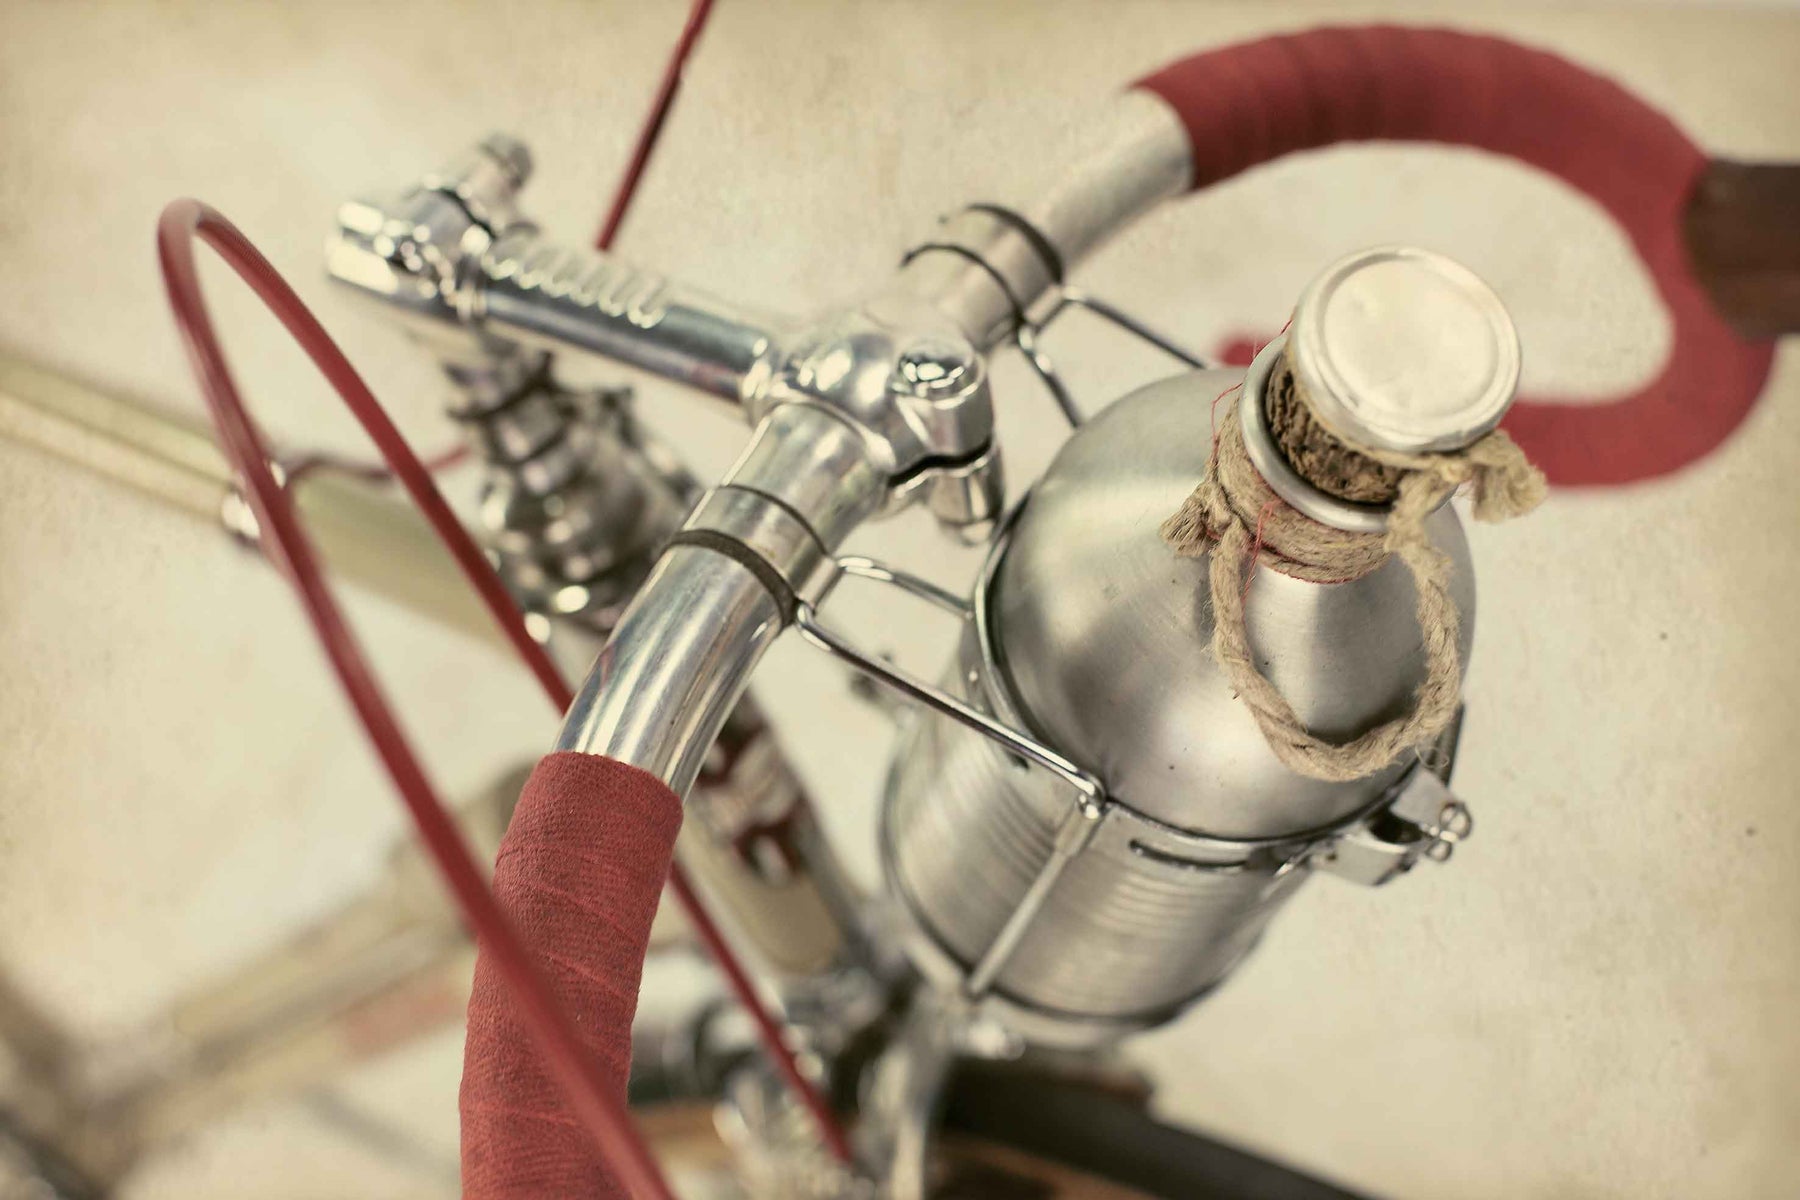 Find water bottles to complete your vintage bicycle